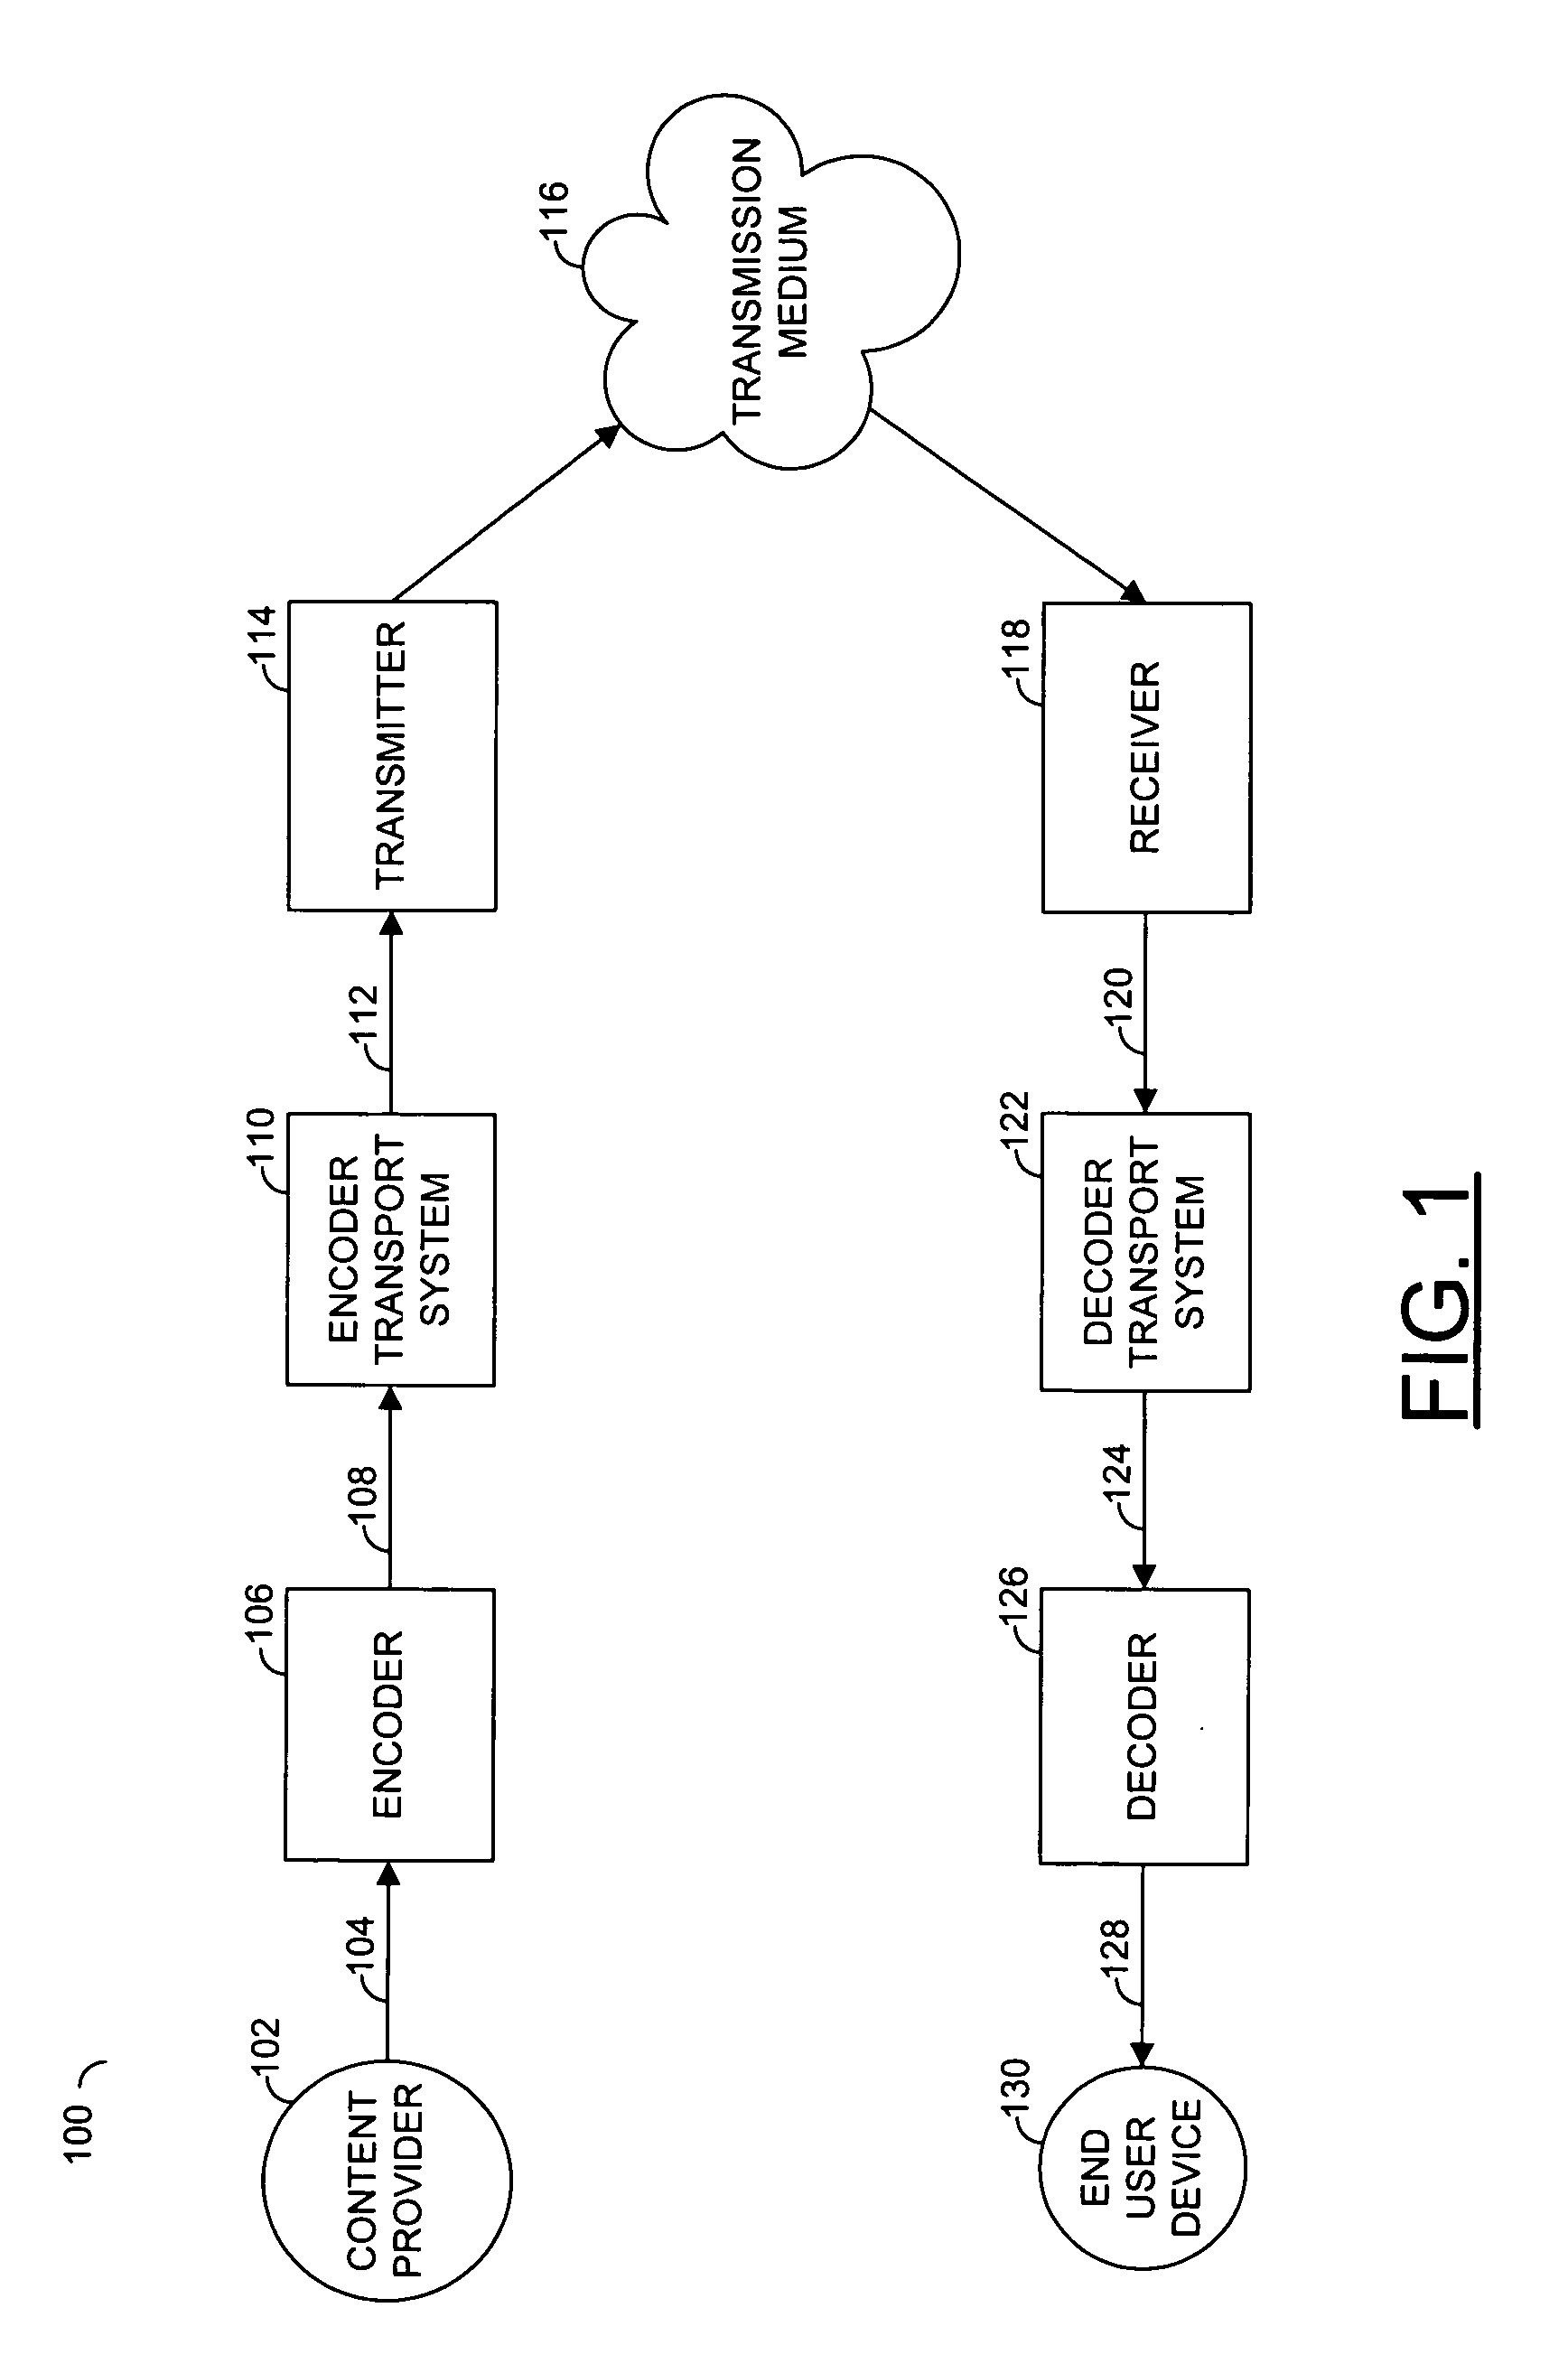 Method for selection of contexts for arithmetic coding of reference picture and motion vector residual bitstream syntax elements